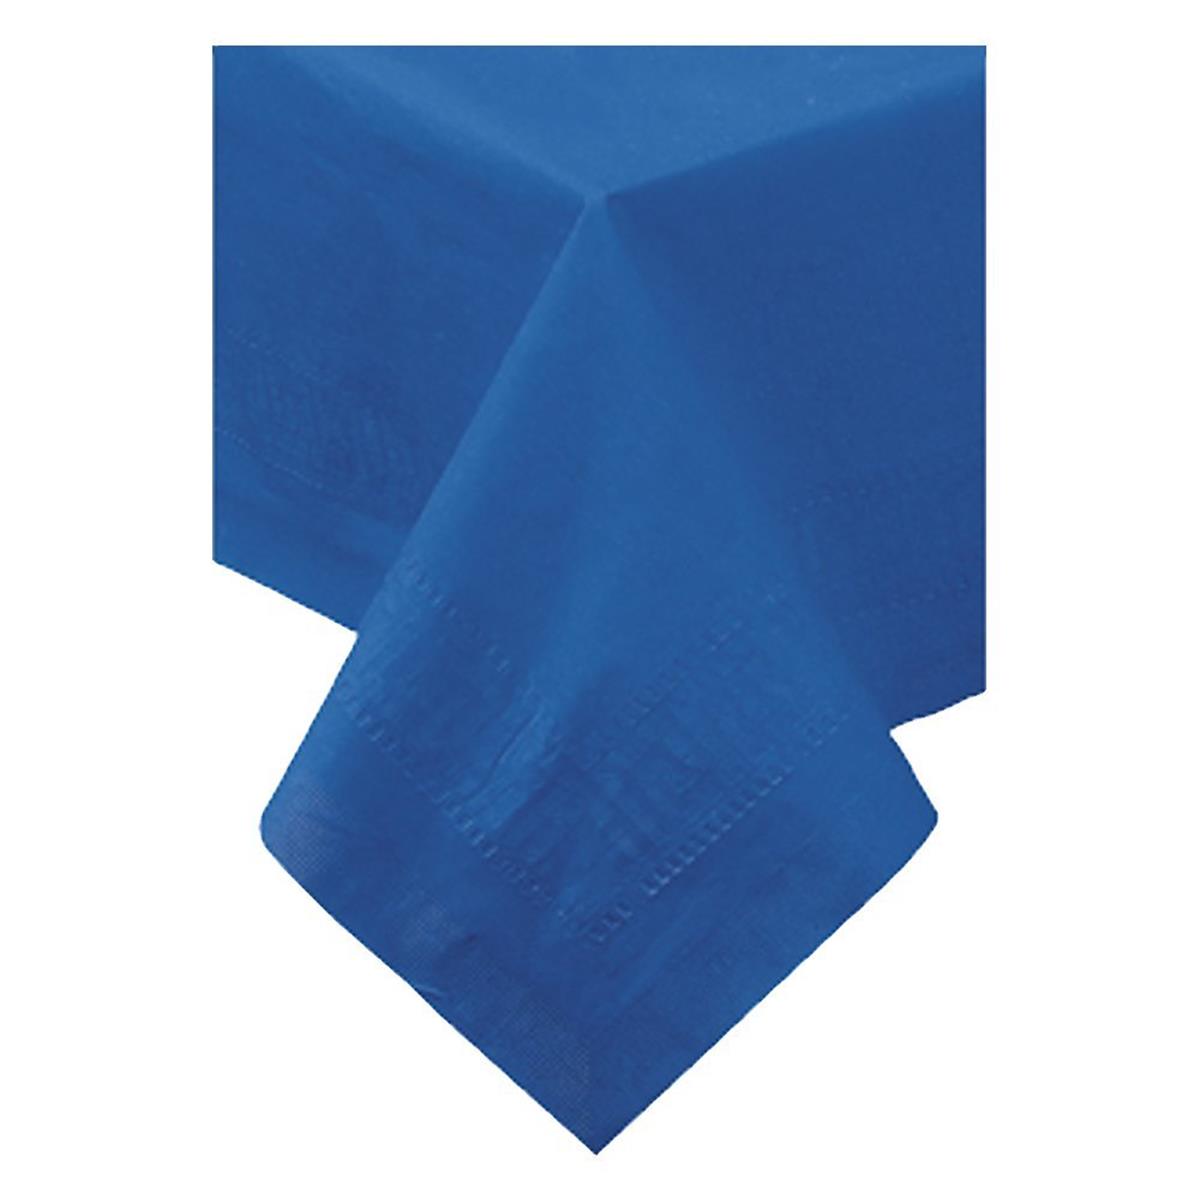 220622 Pec 54 X 108 In. 2ply Cellutex Tissue Table Cover, Navy - Pack Of 25